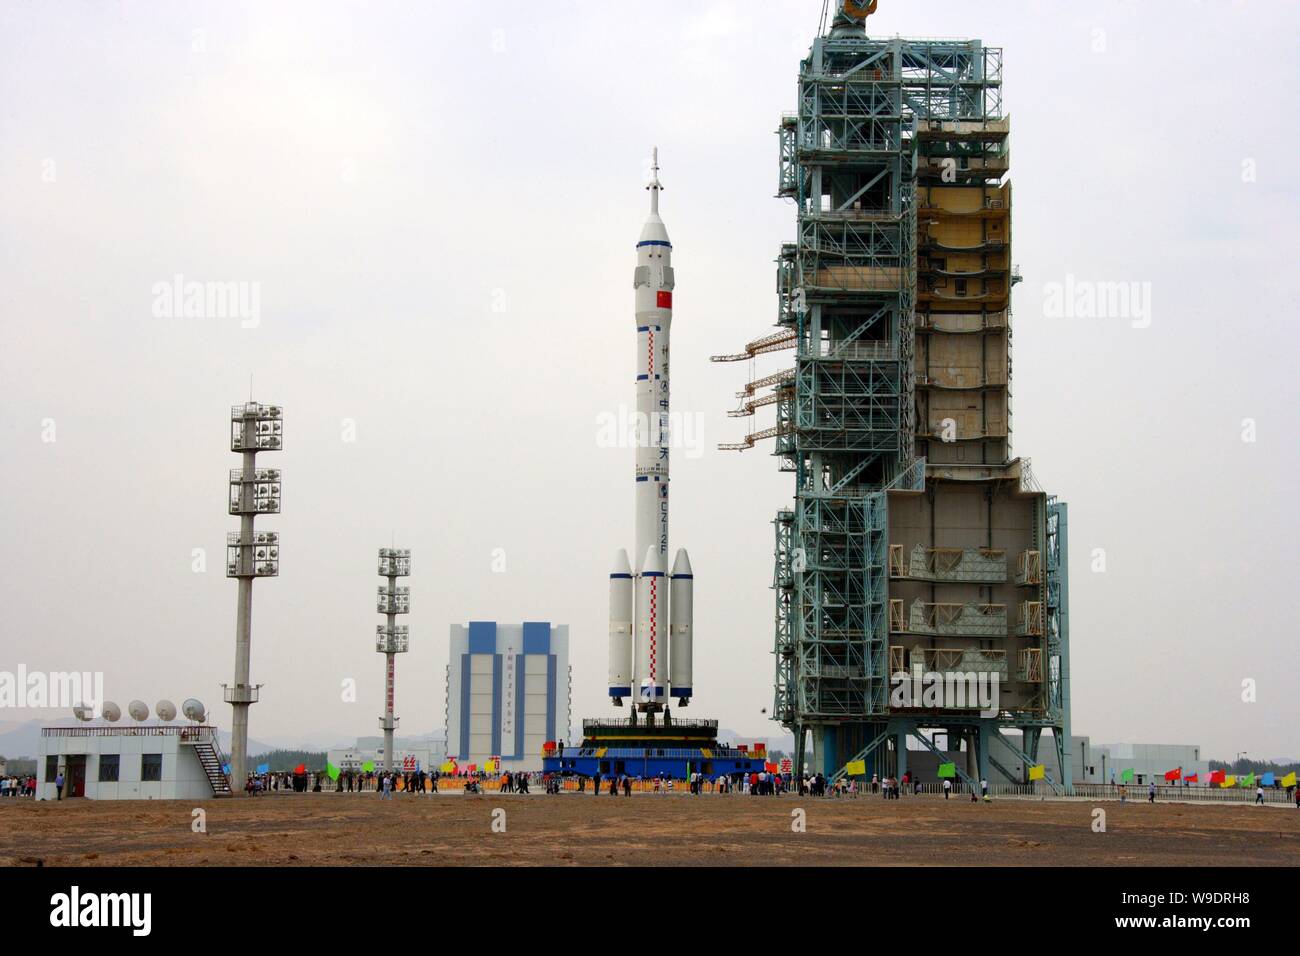 Chinese aeronautical scientists and workers move a Long March 2F (CZ-2F) space rocket caryying the Shenzhou VII manned spacecraft from the final assem Stock Photo